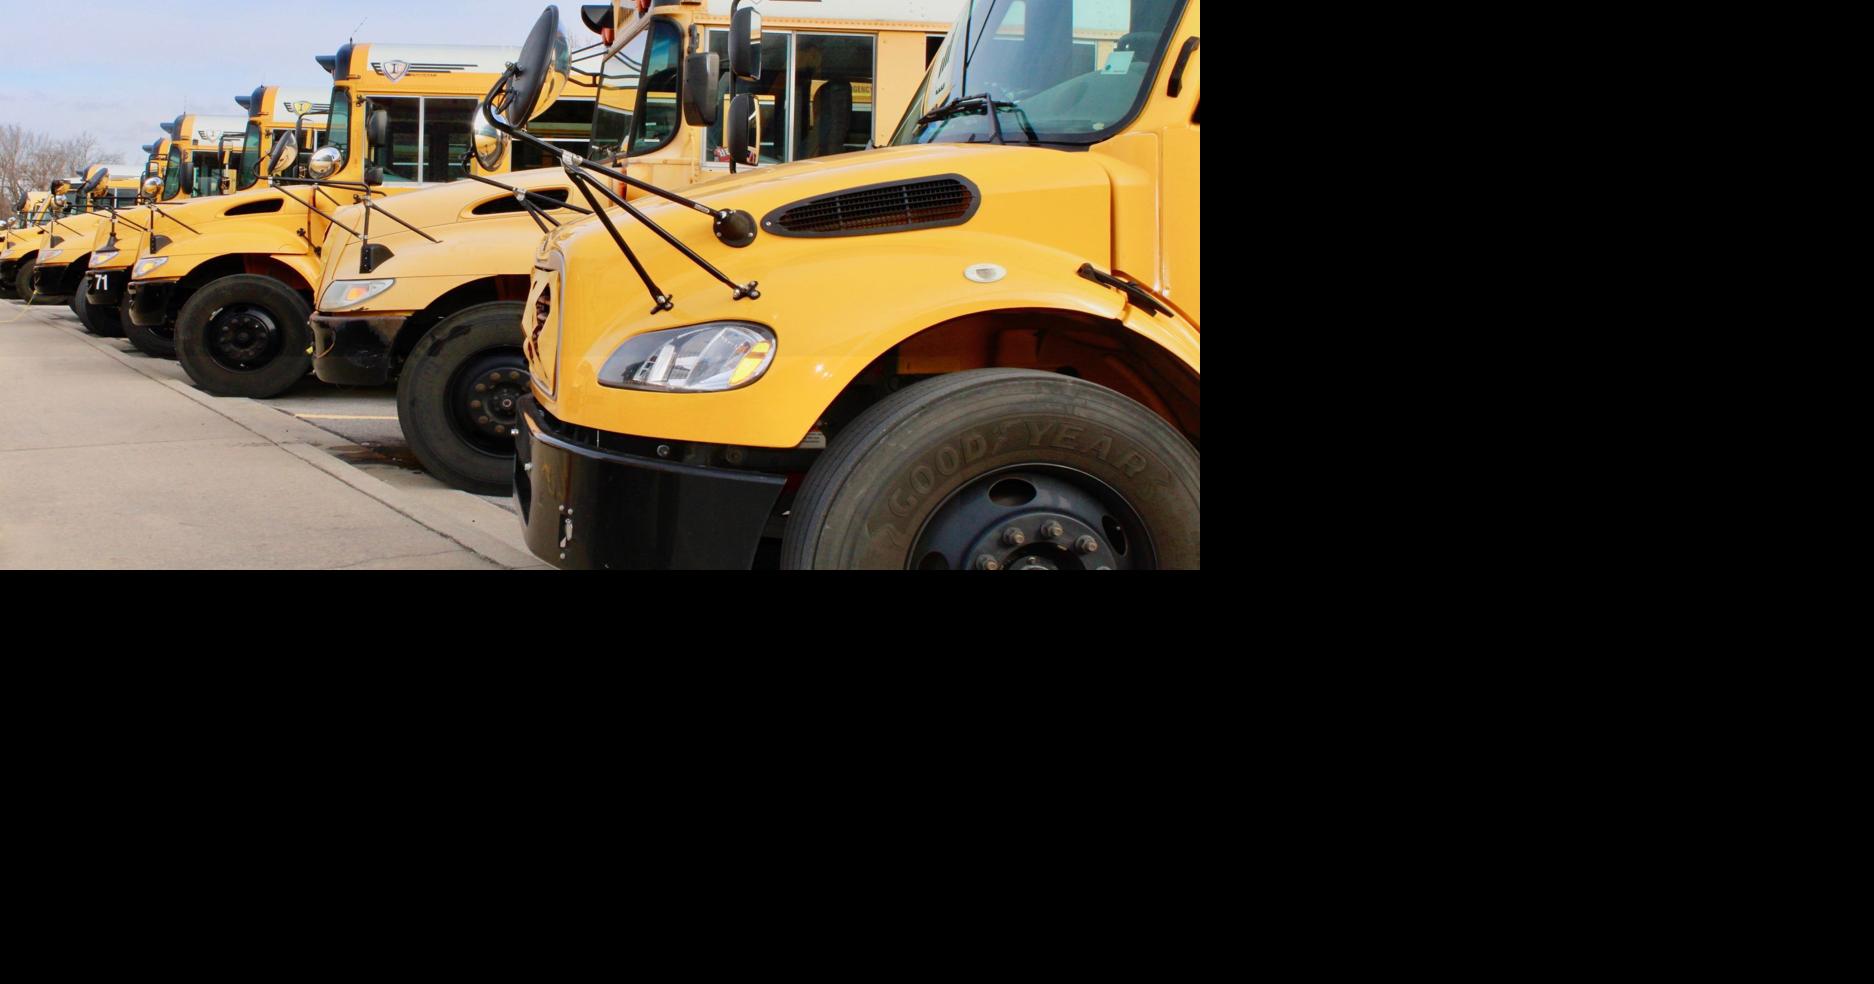 Education notebook: Oklahoma districts get $29 million for school buses